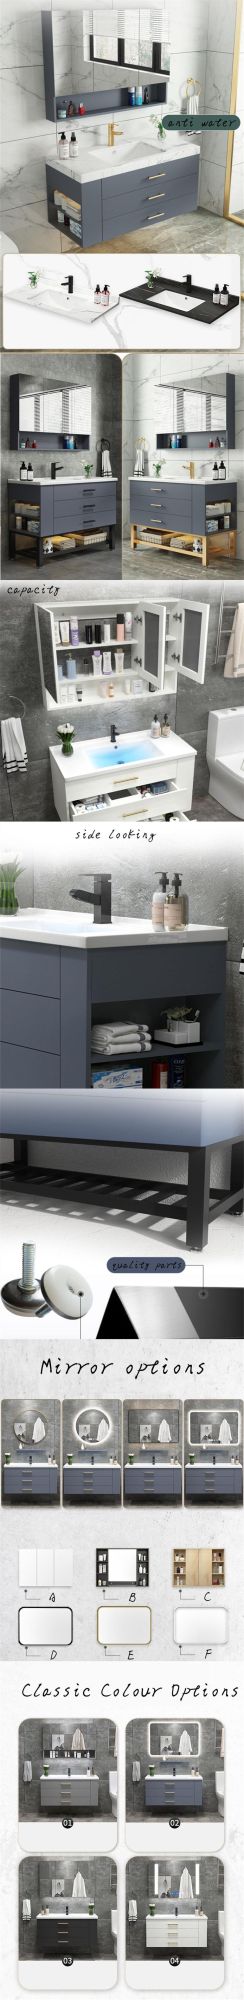 Simple Fashion Stylish Hot Sell Glass Basin Bathroom Cabinet with Mirror